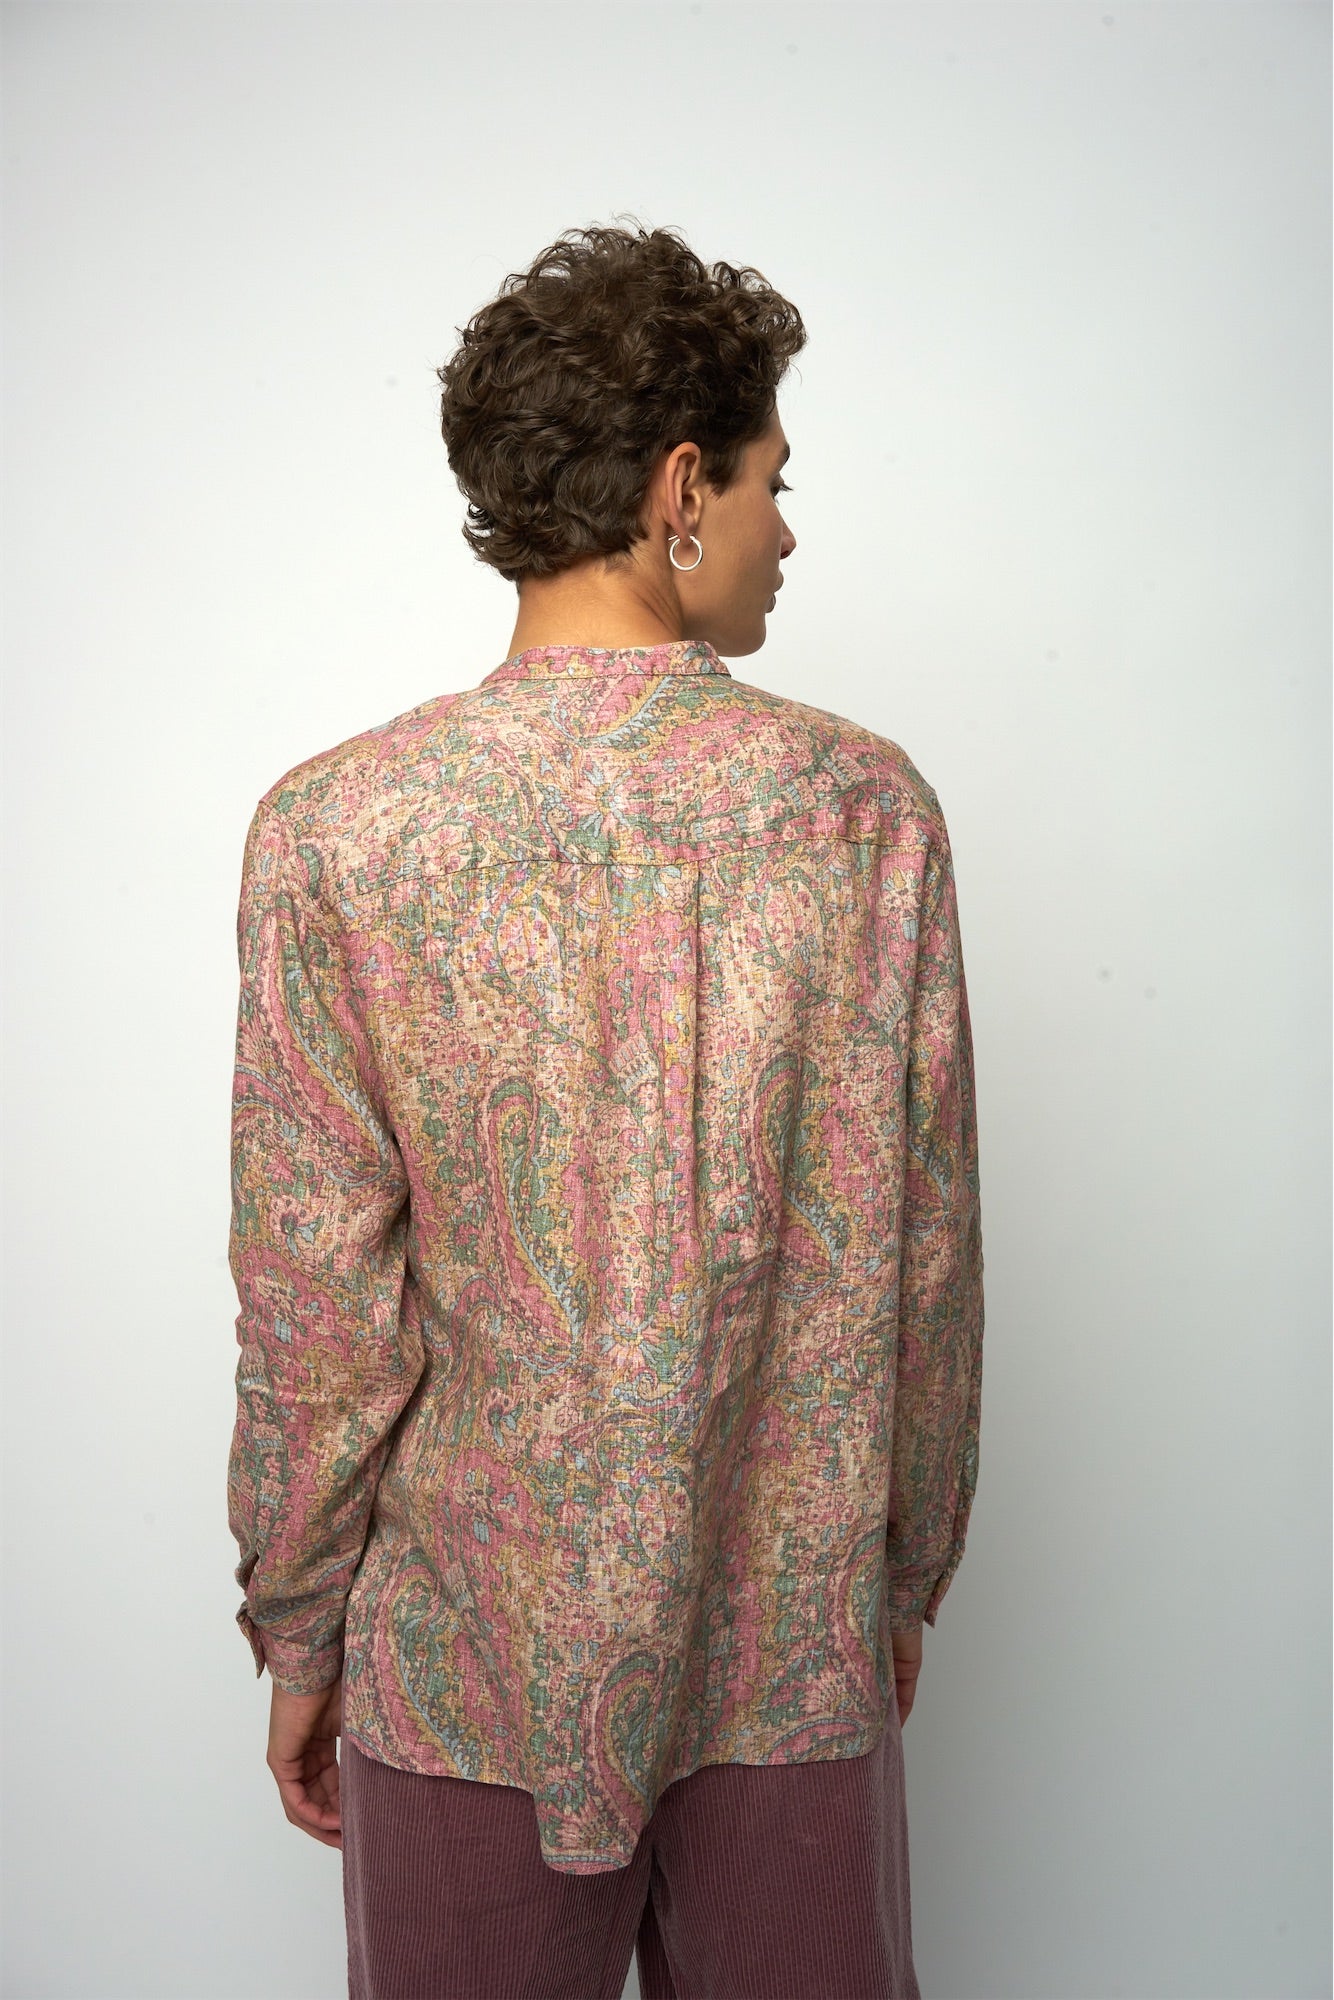 Zen Shirt in a Pink, Green and Beige Shaded Paisley Design